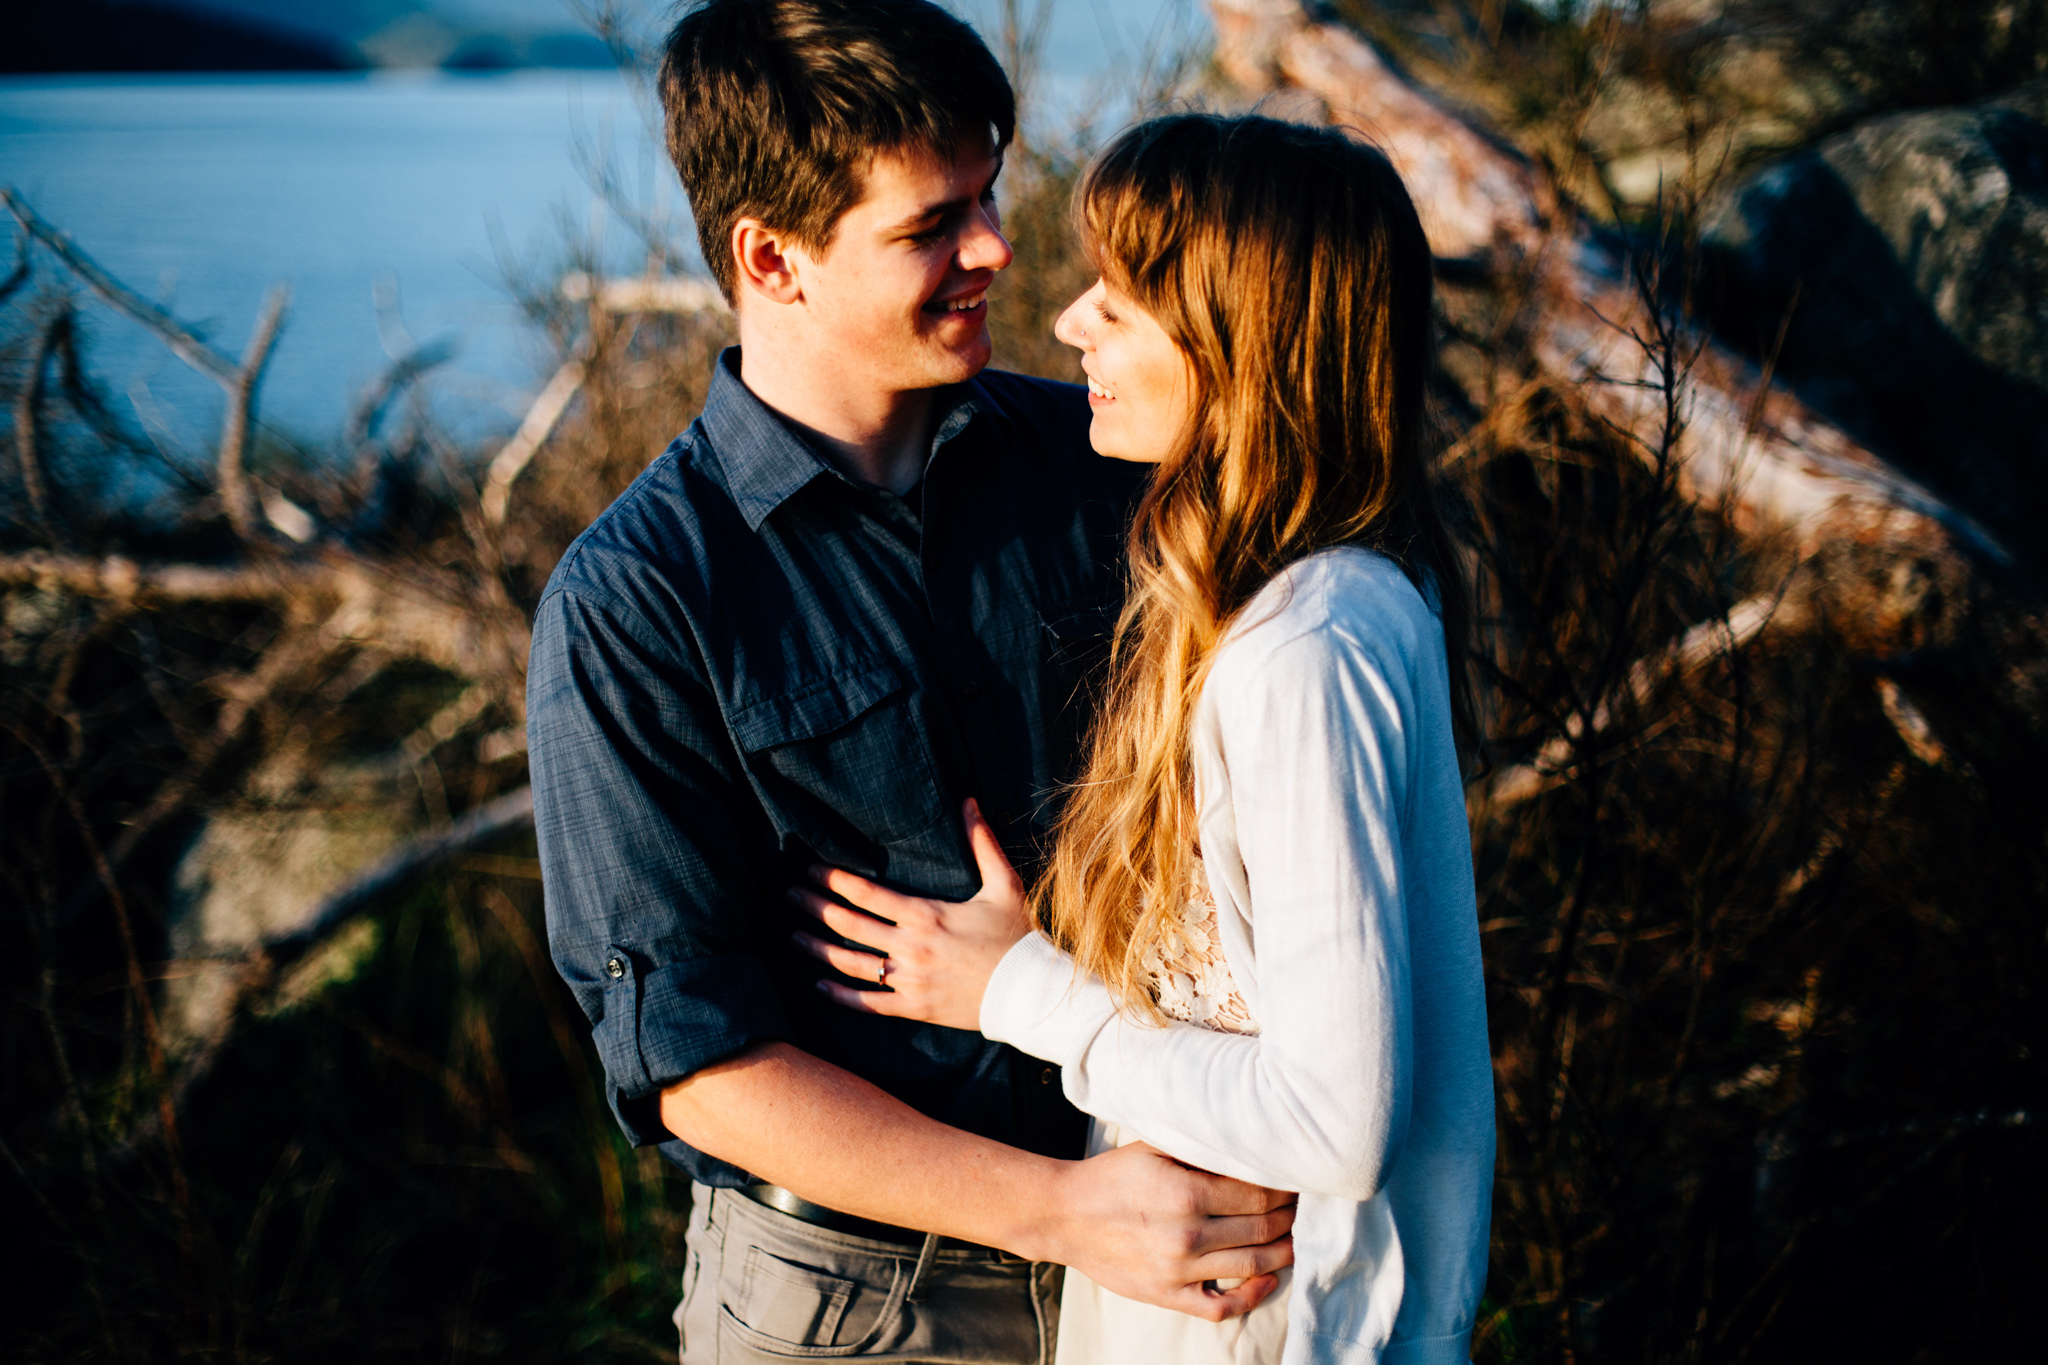 Vancouver Whytecliff Park Engagement Photographer - Emmy Lou Virginia Photography-33.jpg